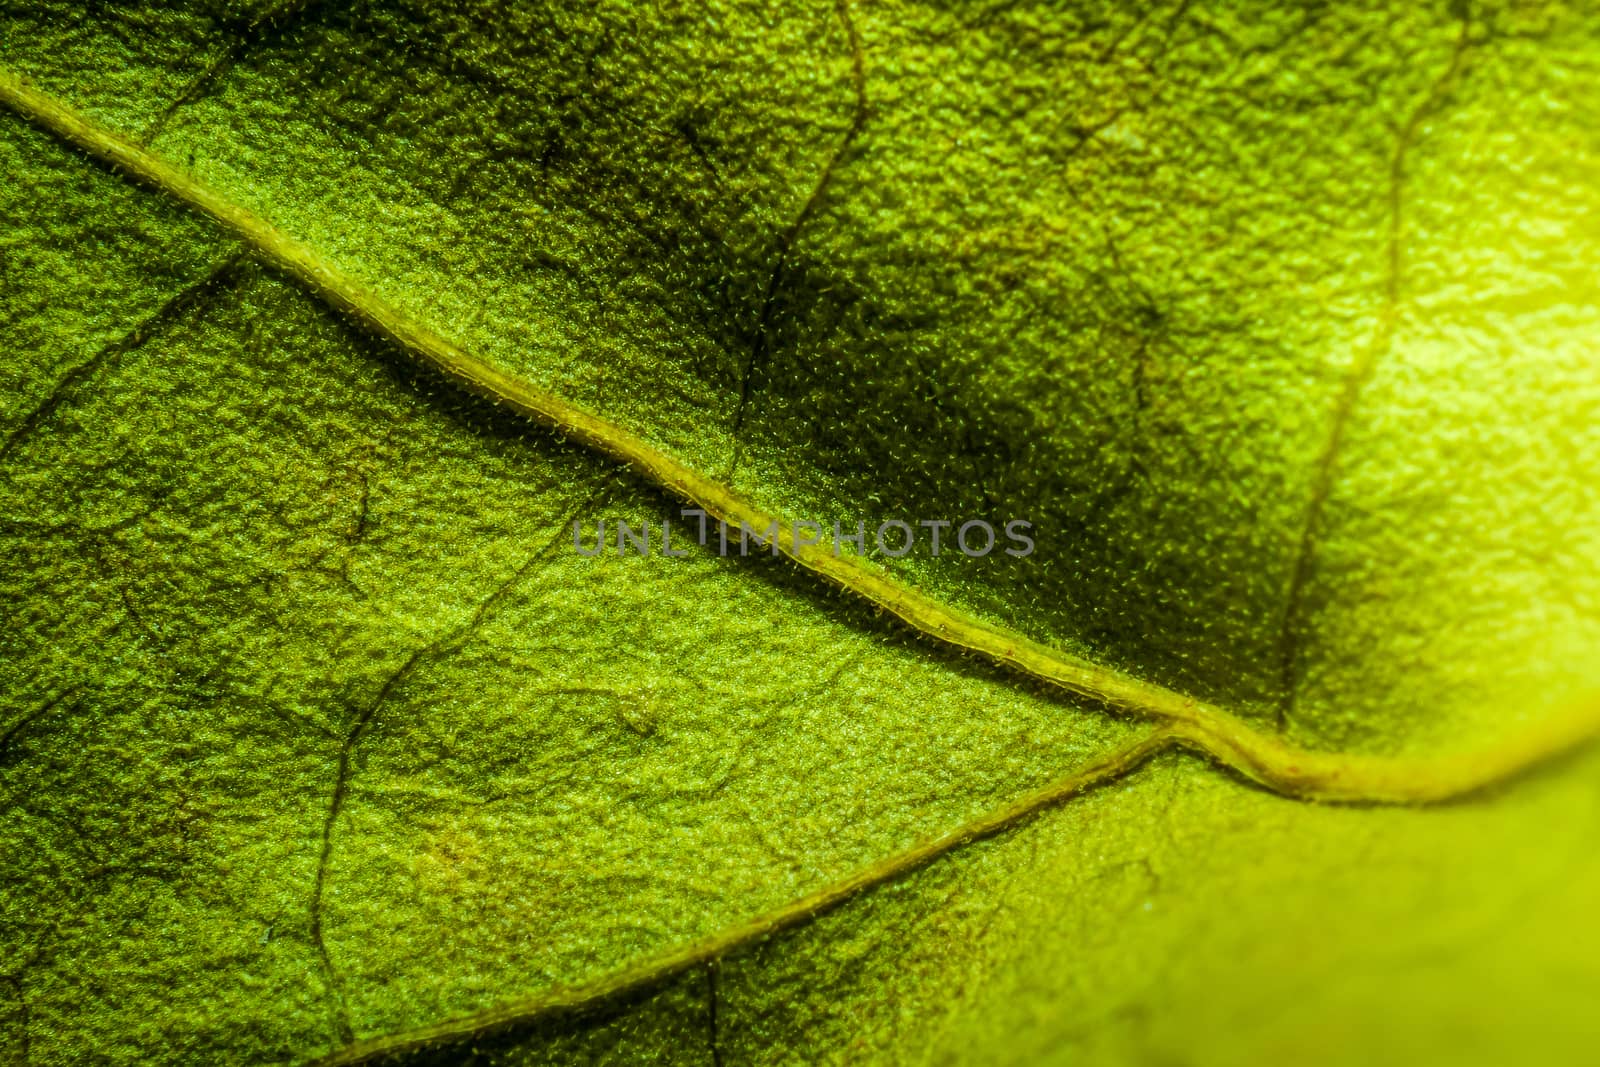 Abstract green leaf background for texture, macro